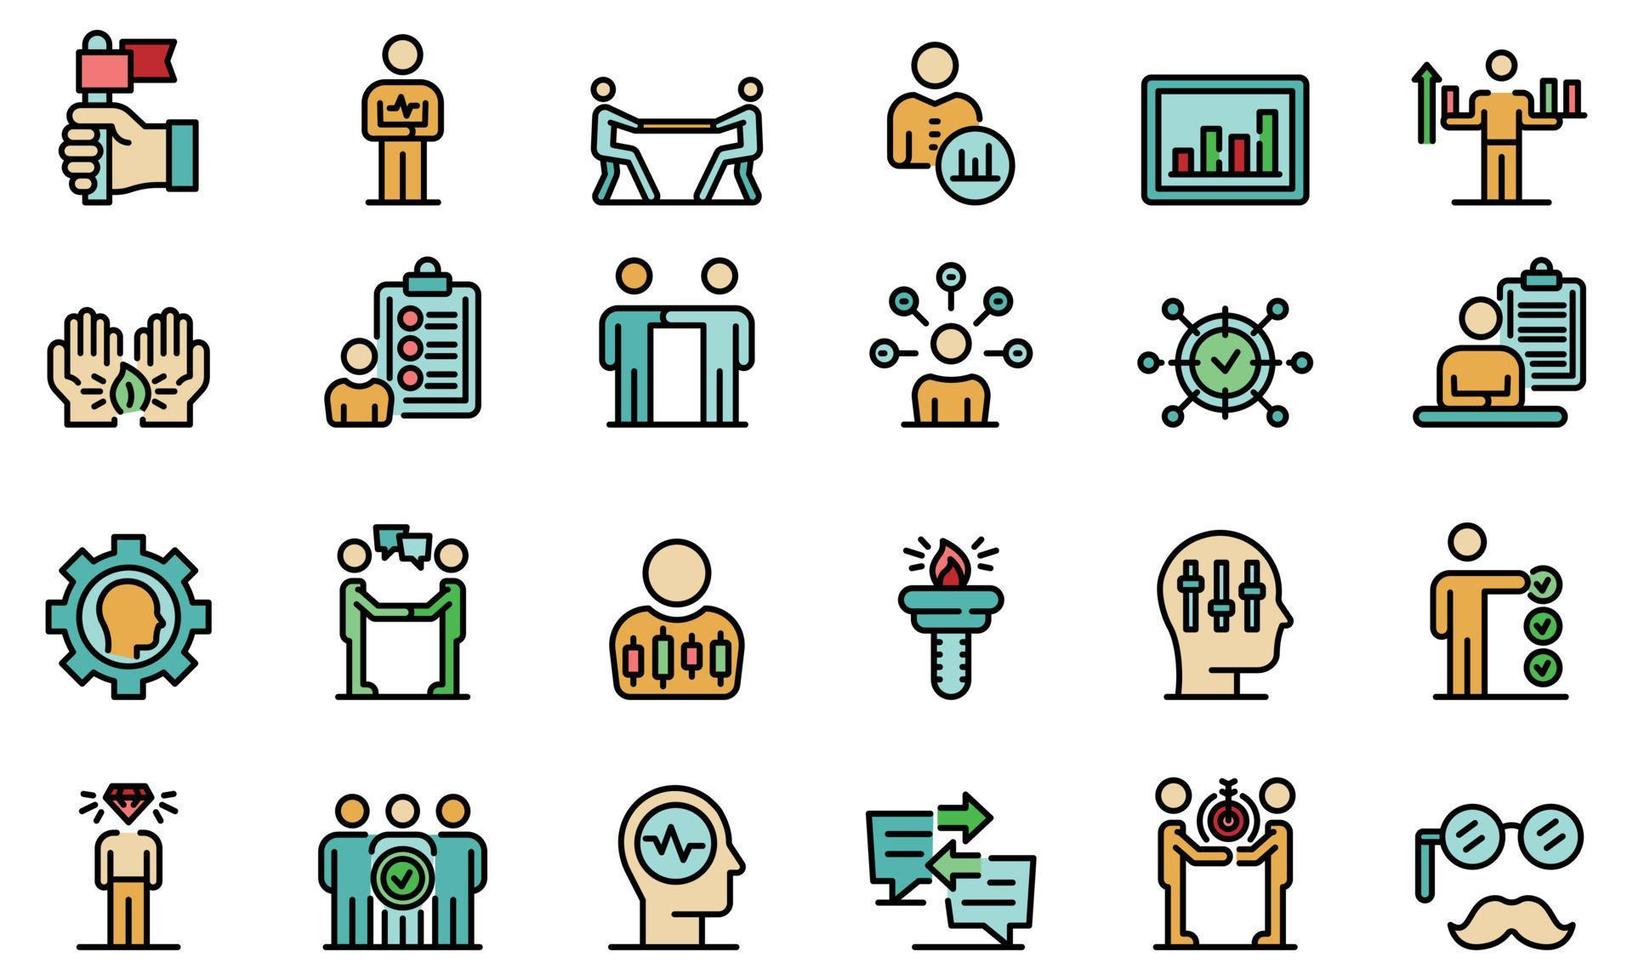 Personal traits icons set vector flat